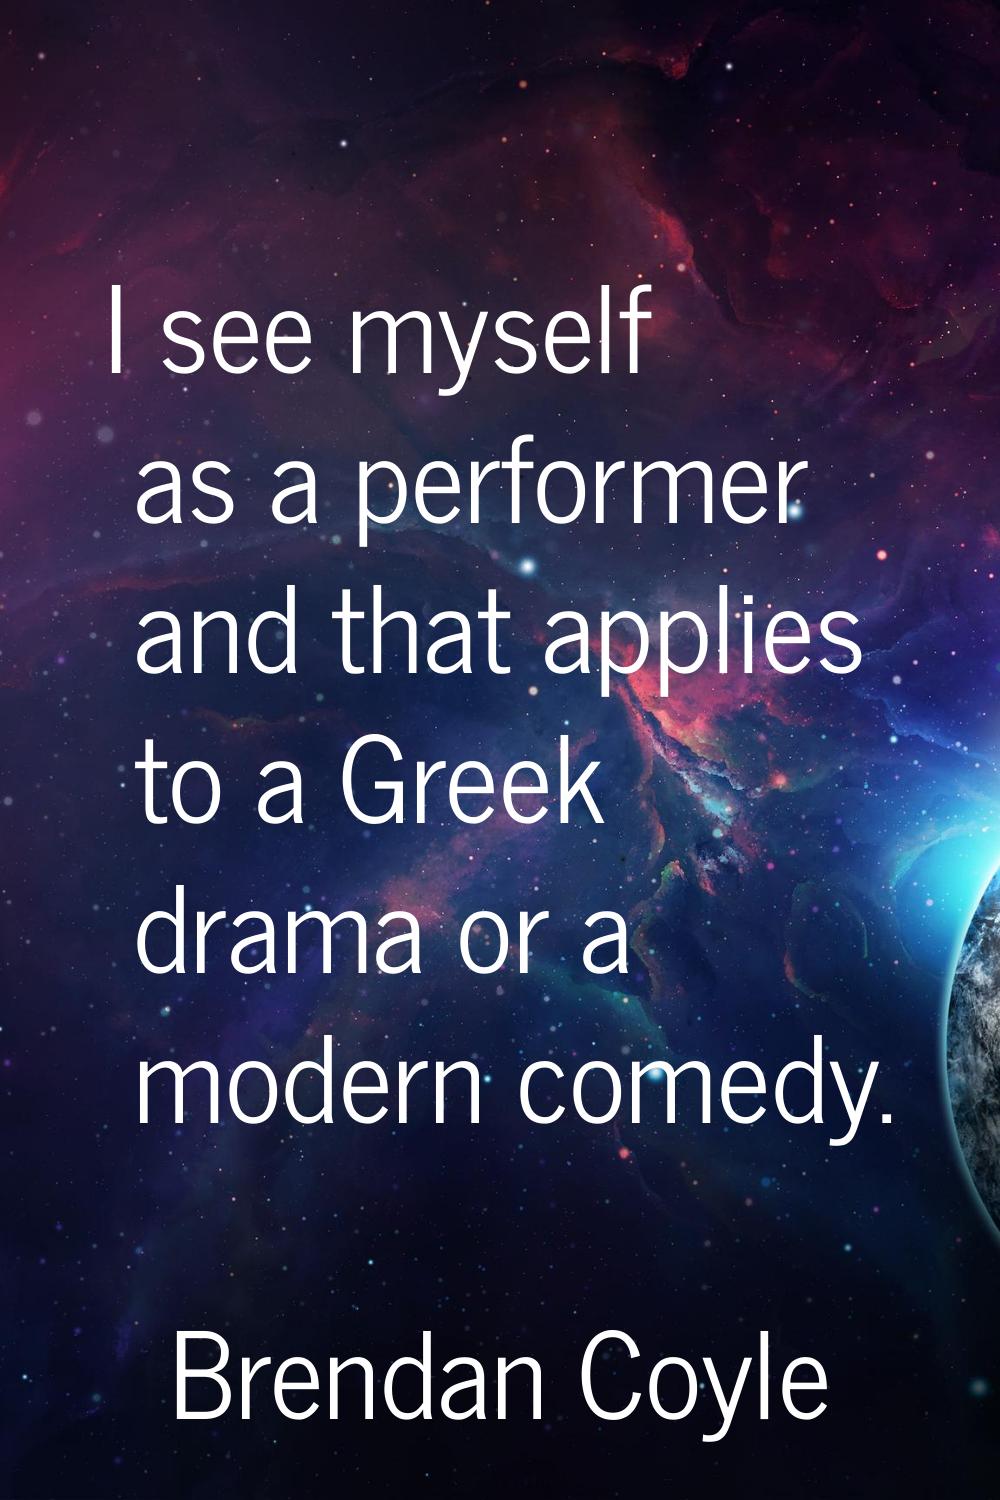 I see myself as a performer and that applies to a Greek drama or a modern comedy.